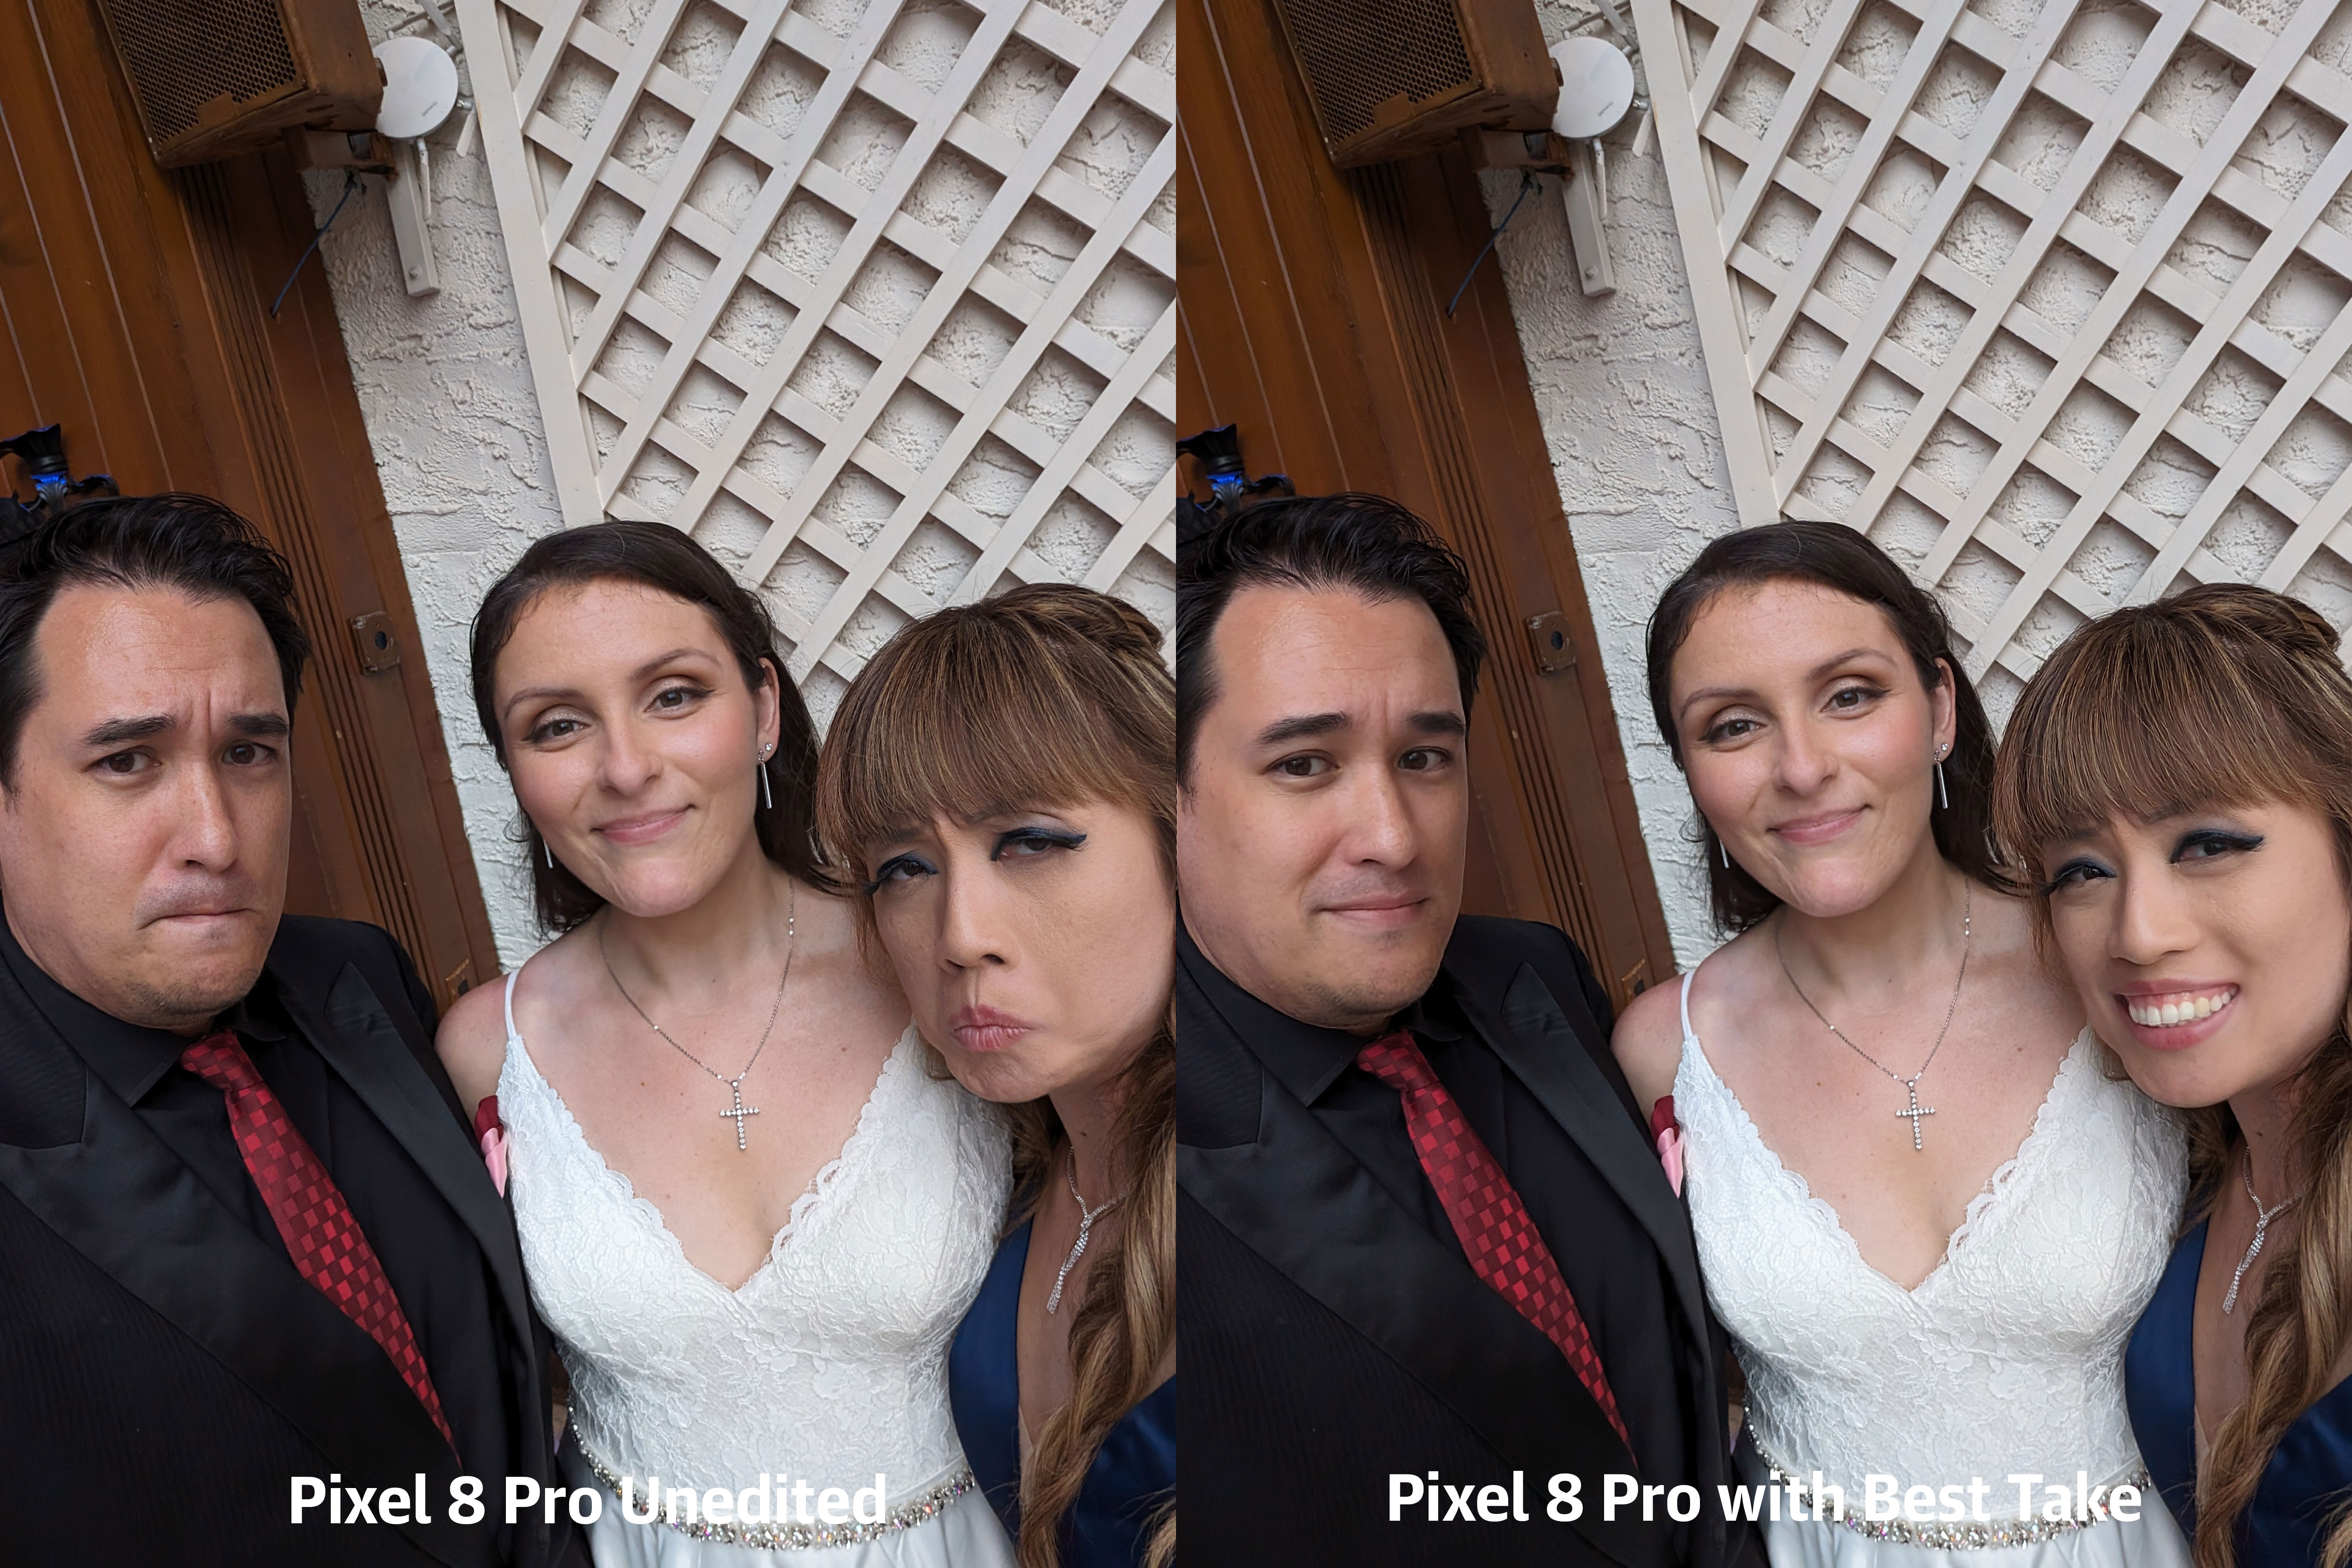 Google's new Best Shot feature uses AI to combine people's reactions from a series of images so you can create one shot where everyone is smiling.